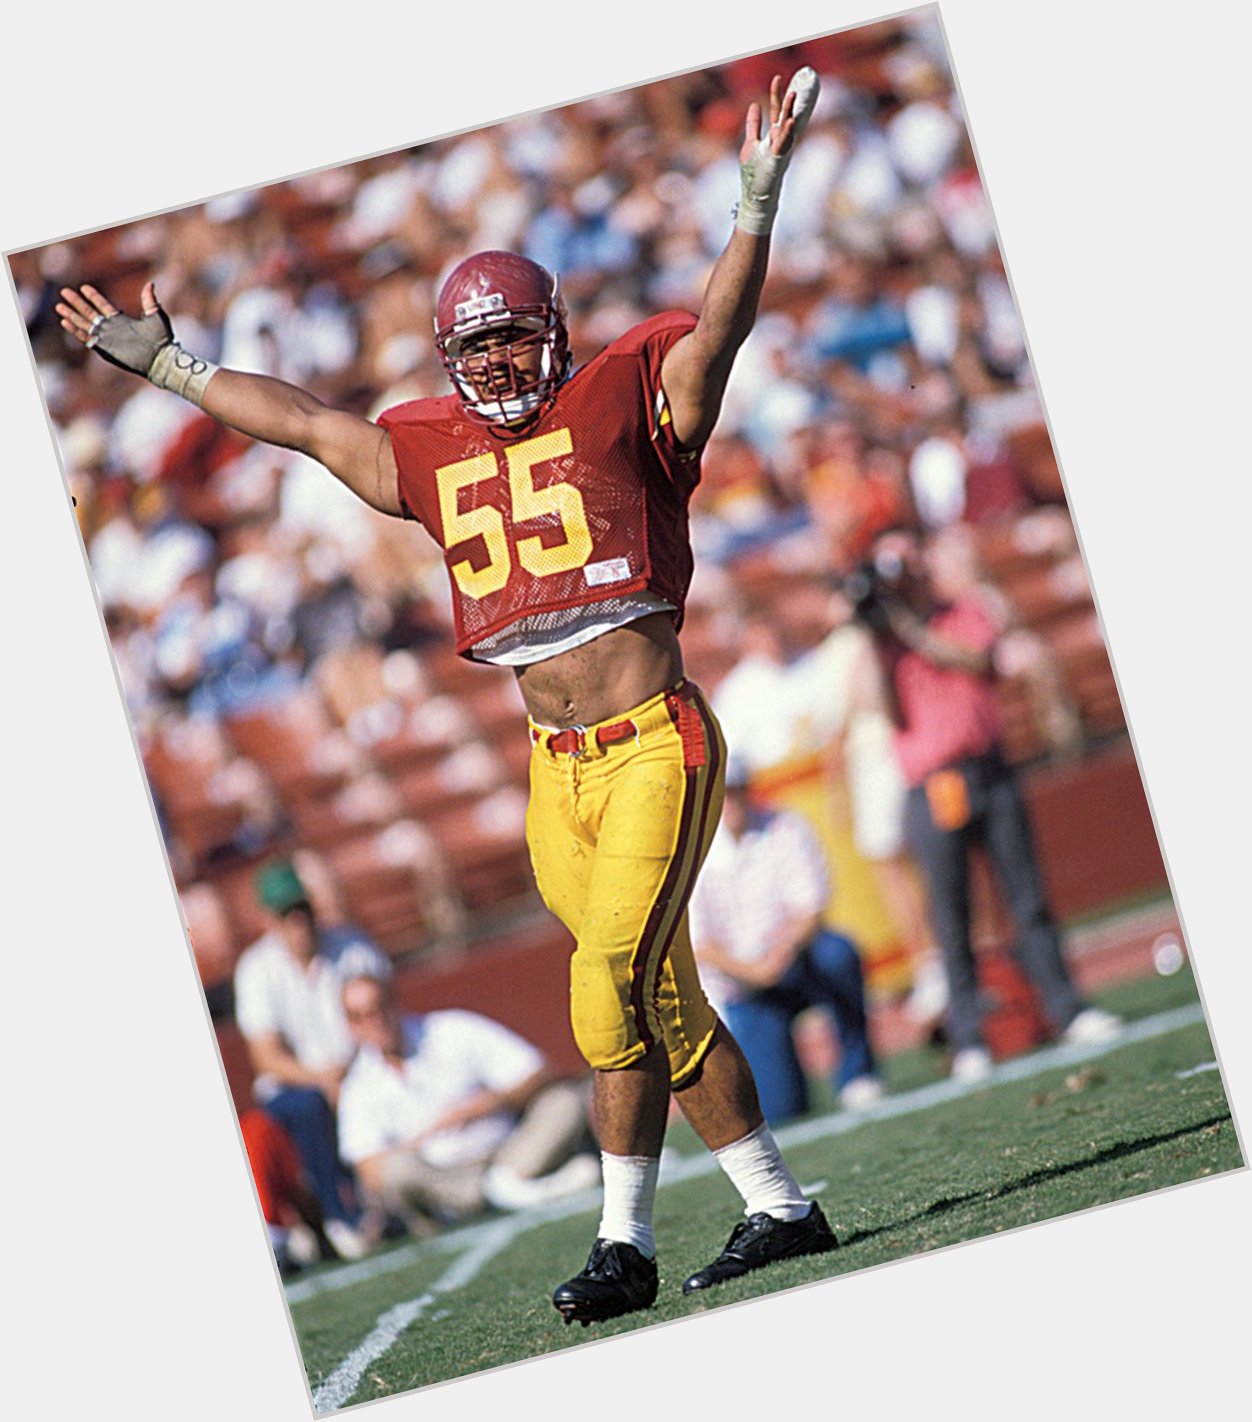 Happy Birthday Junior Seau! The man that made me a USC fan as a child    